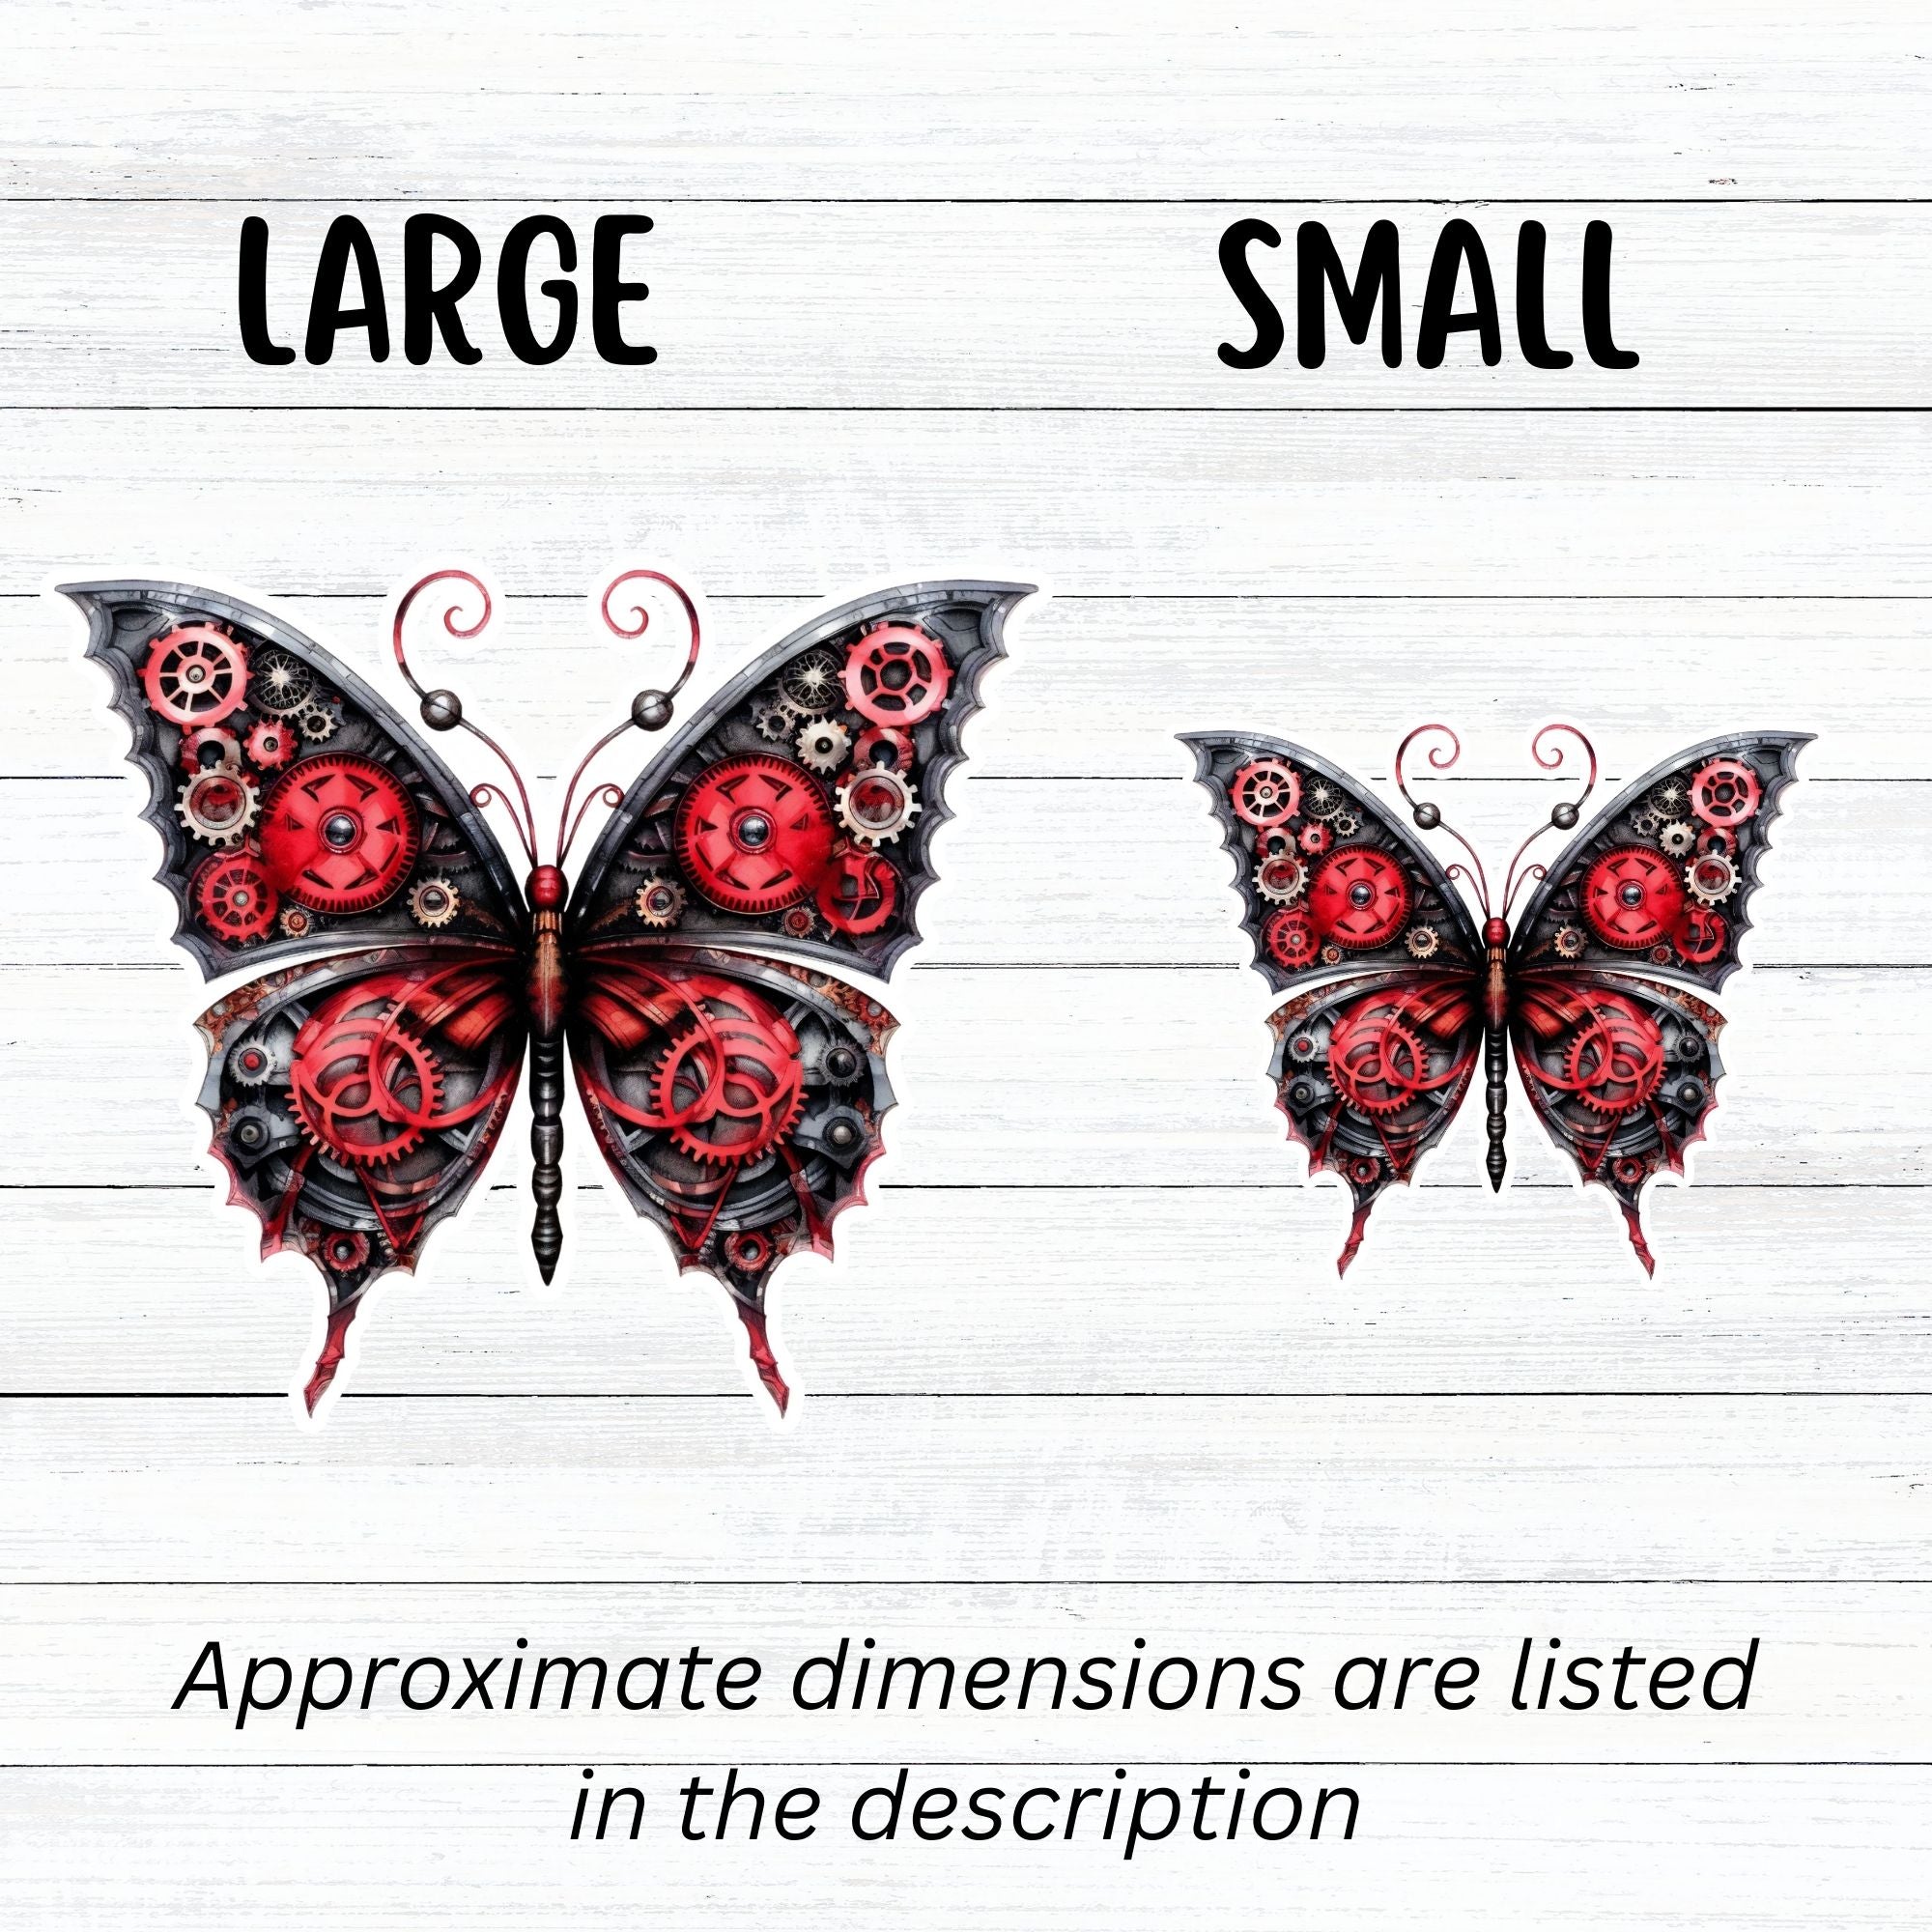 This image shows large and small Steampunk Butterfly 5 Die-Cut Stickers side by side.